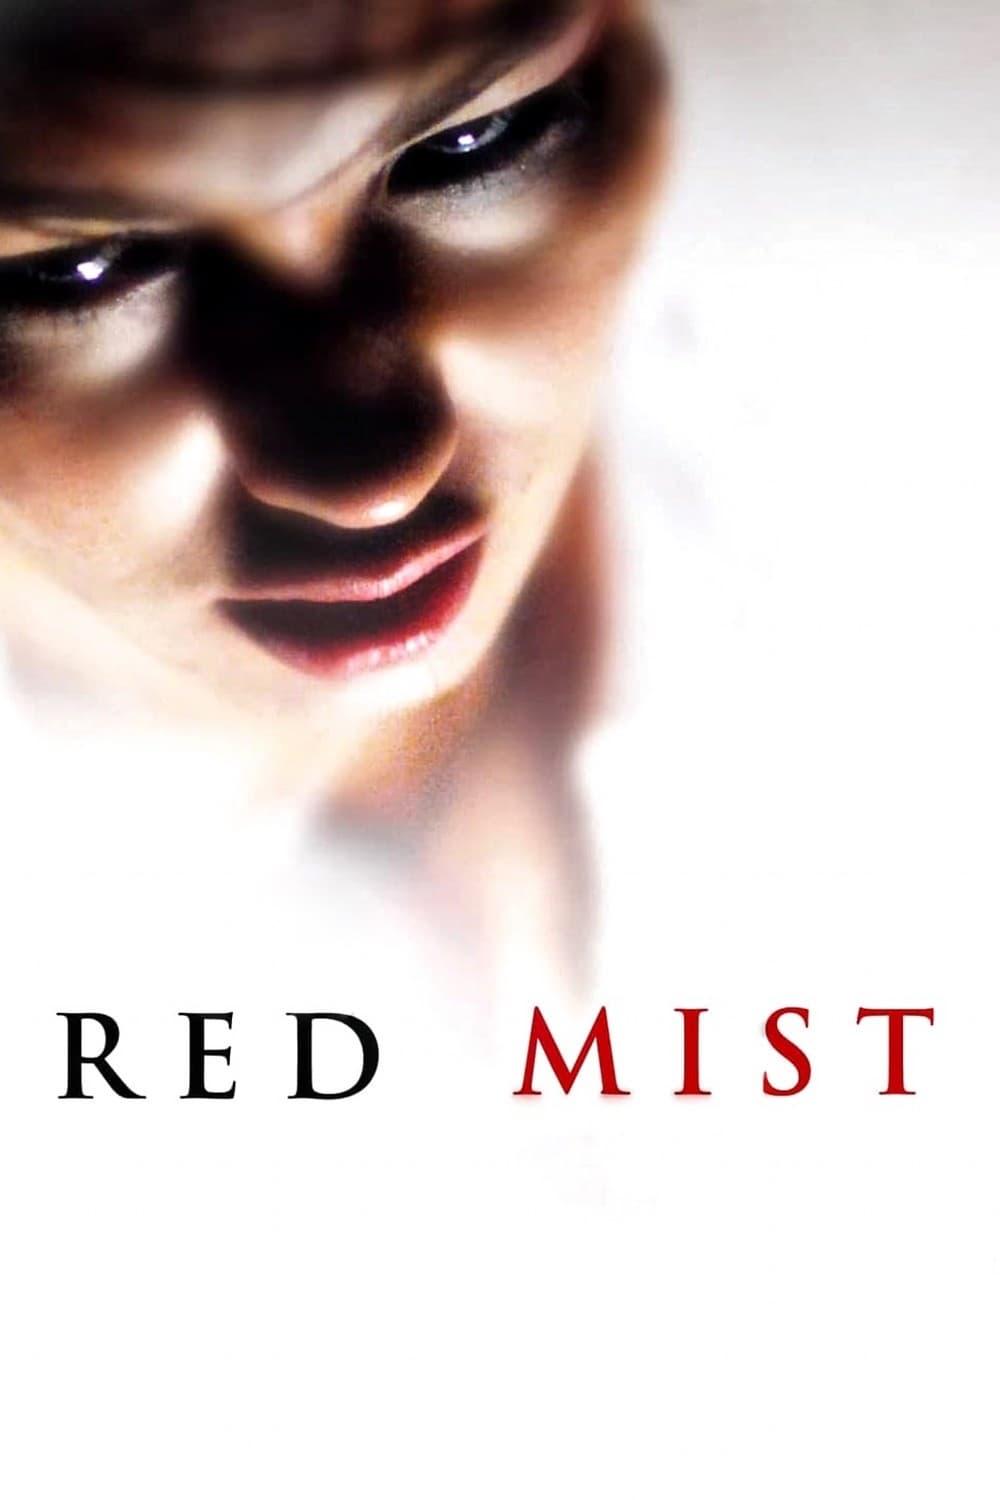 Red Mist poster